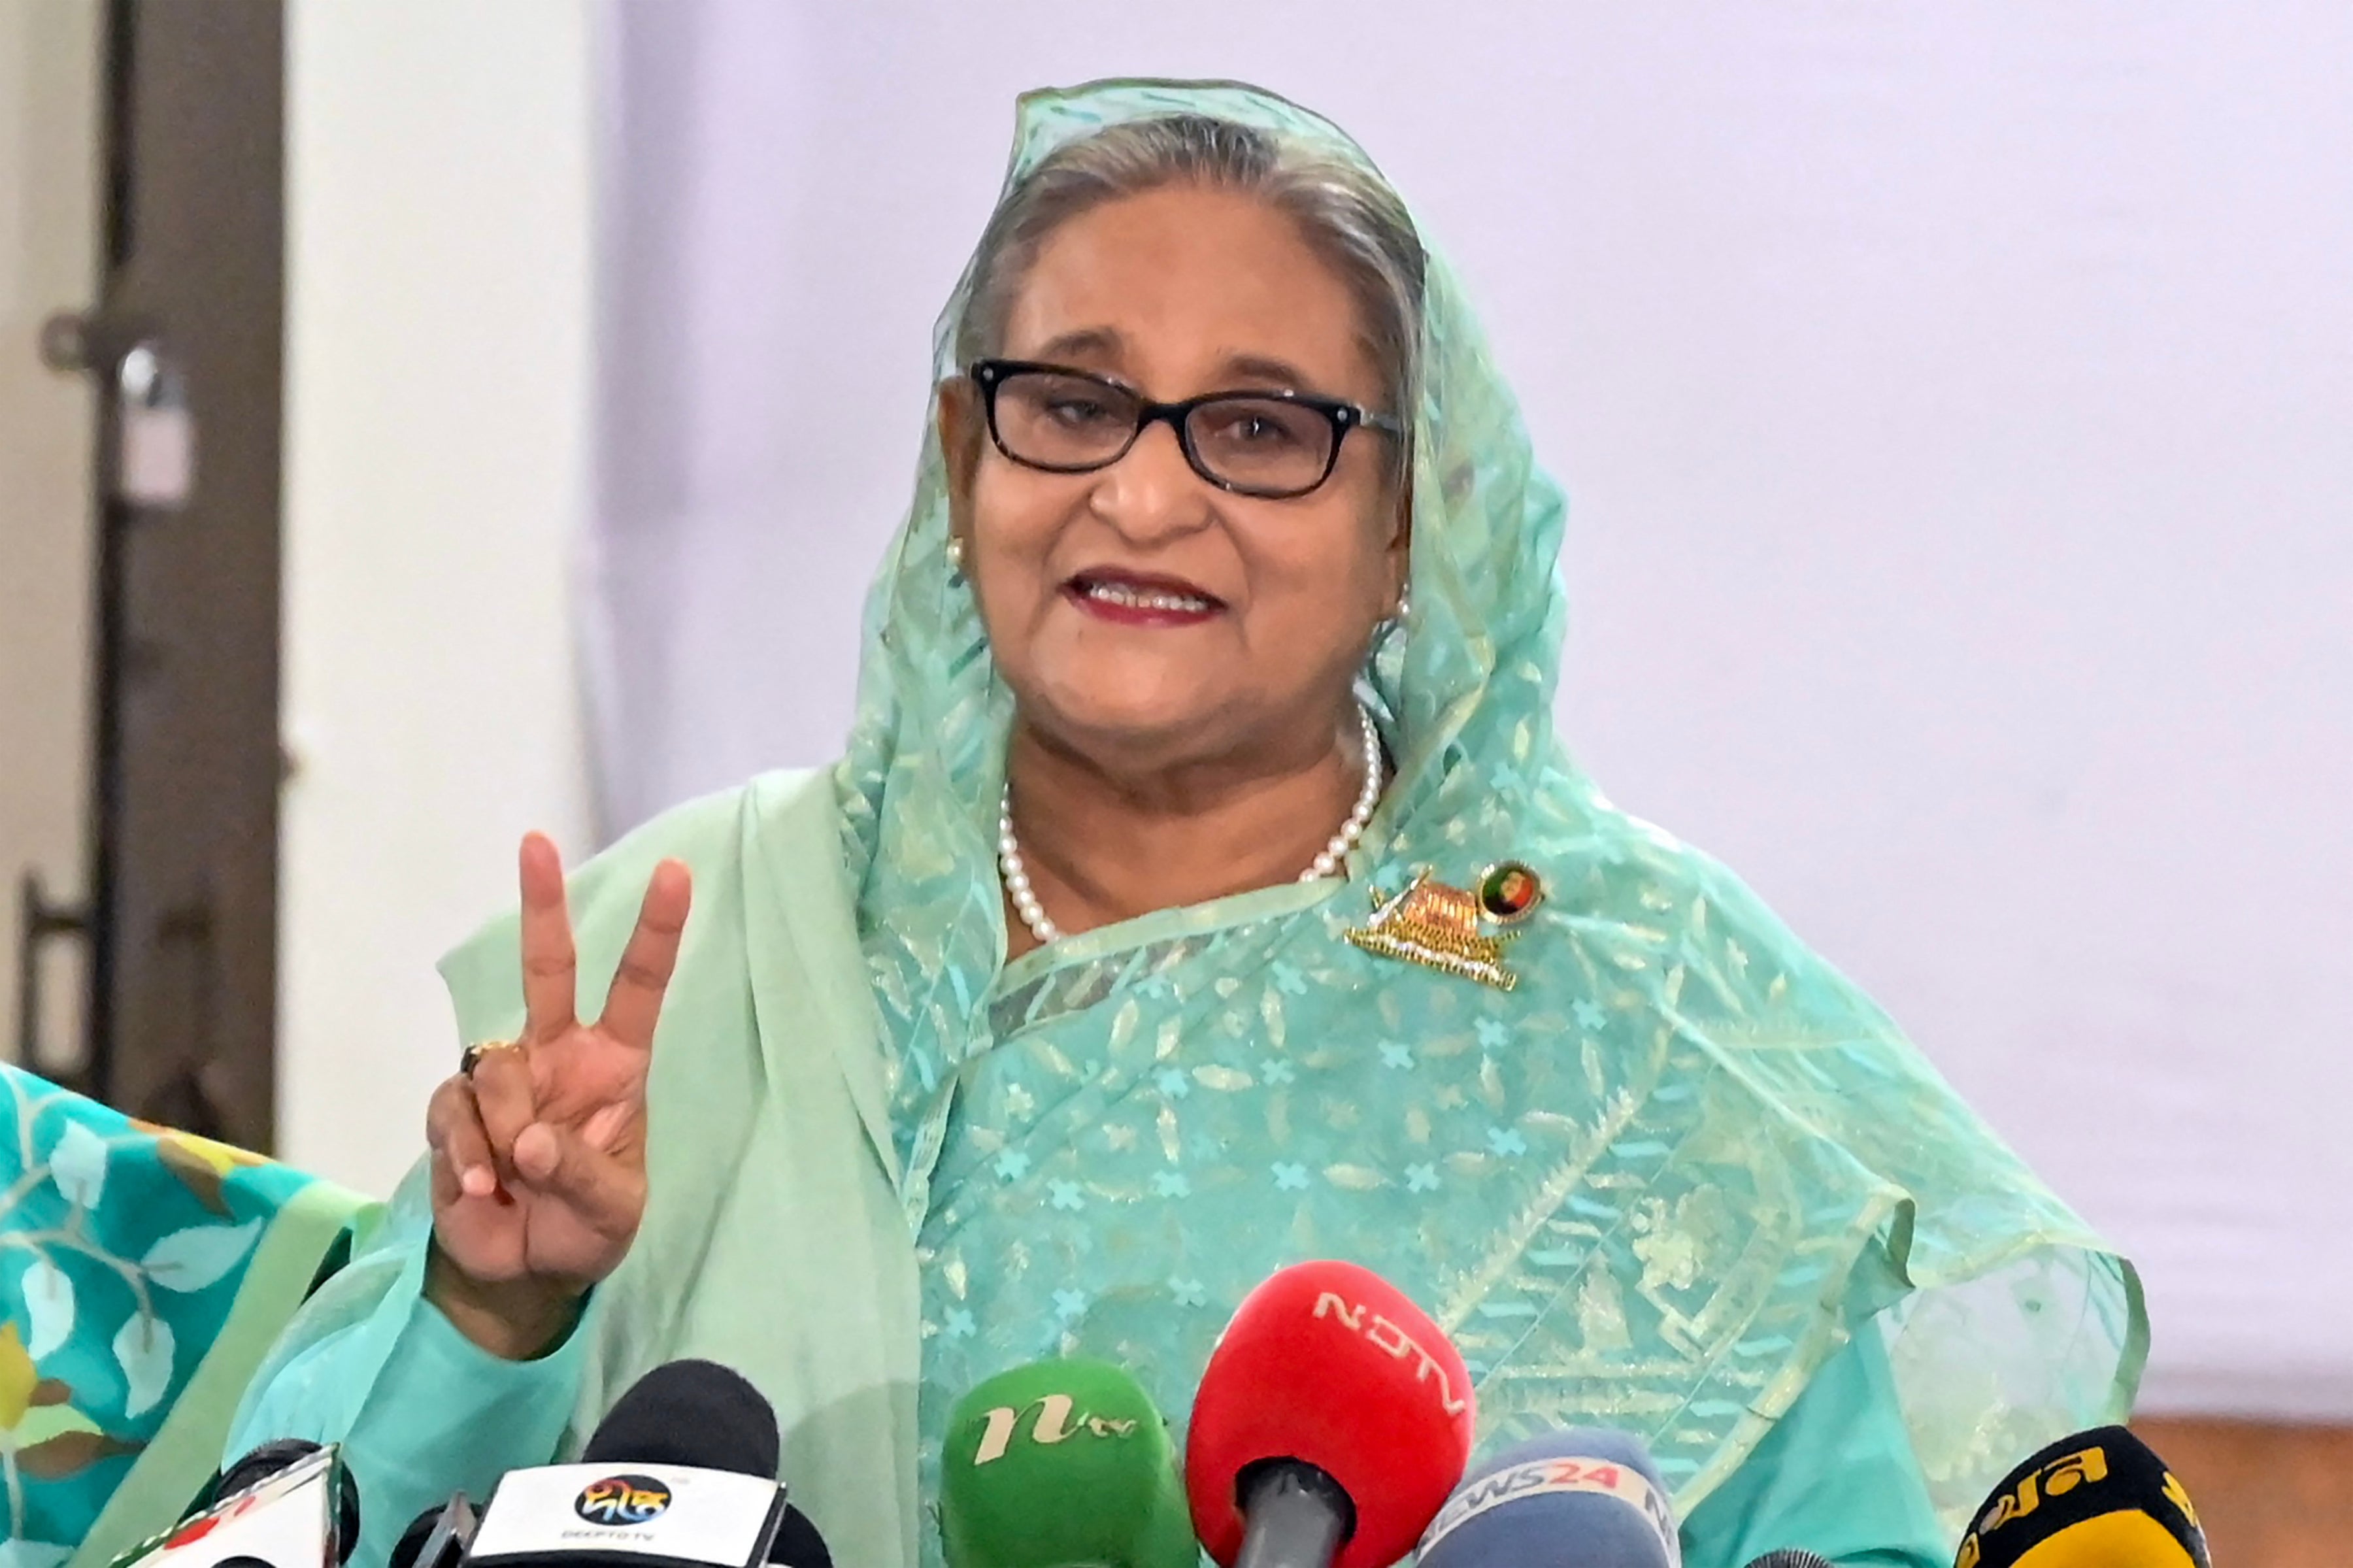 Bangladesh's Prime Minister Sheikh Hasina gestures after casting her vote casts at a polling station in Dhaka